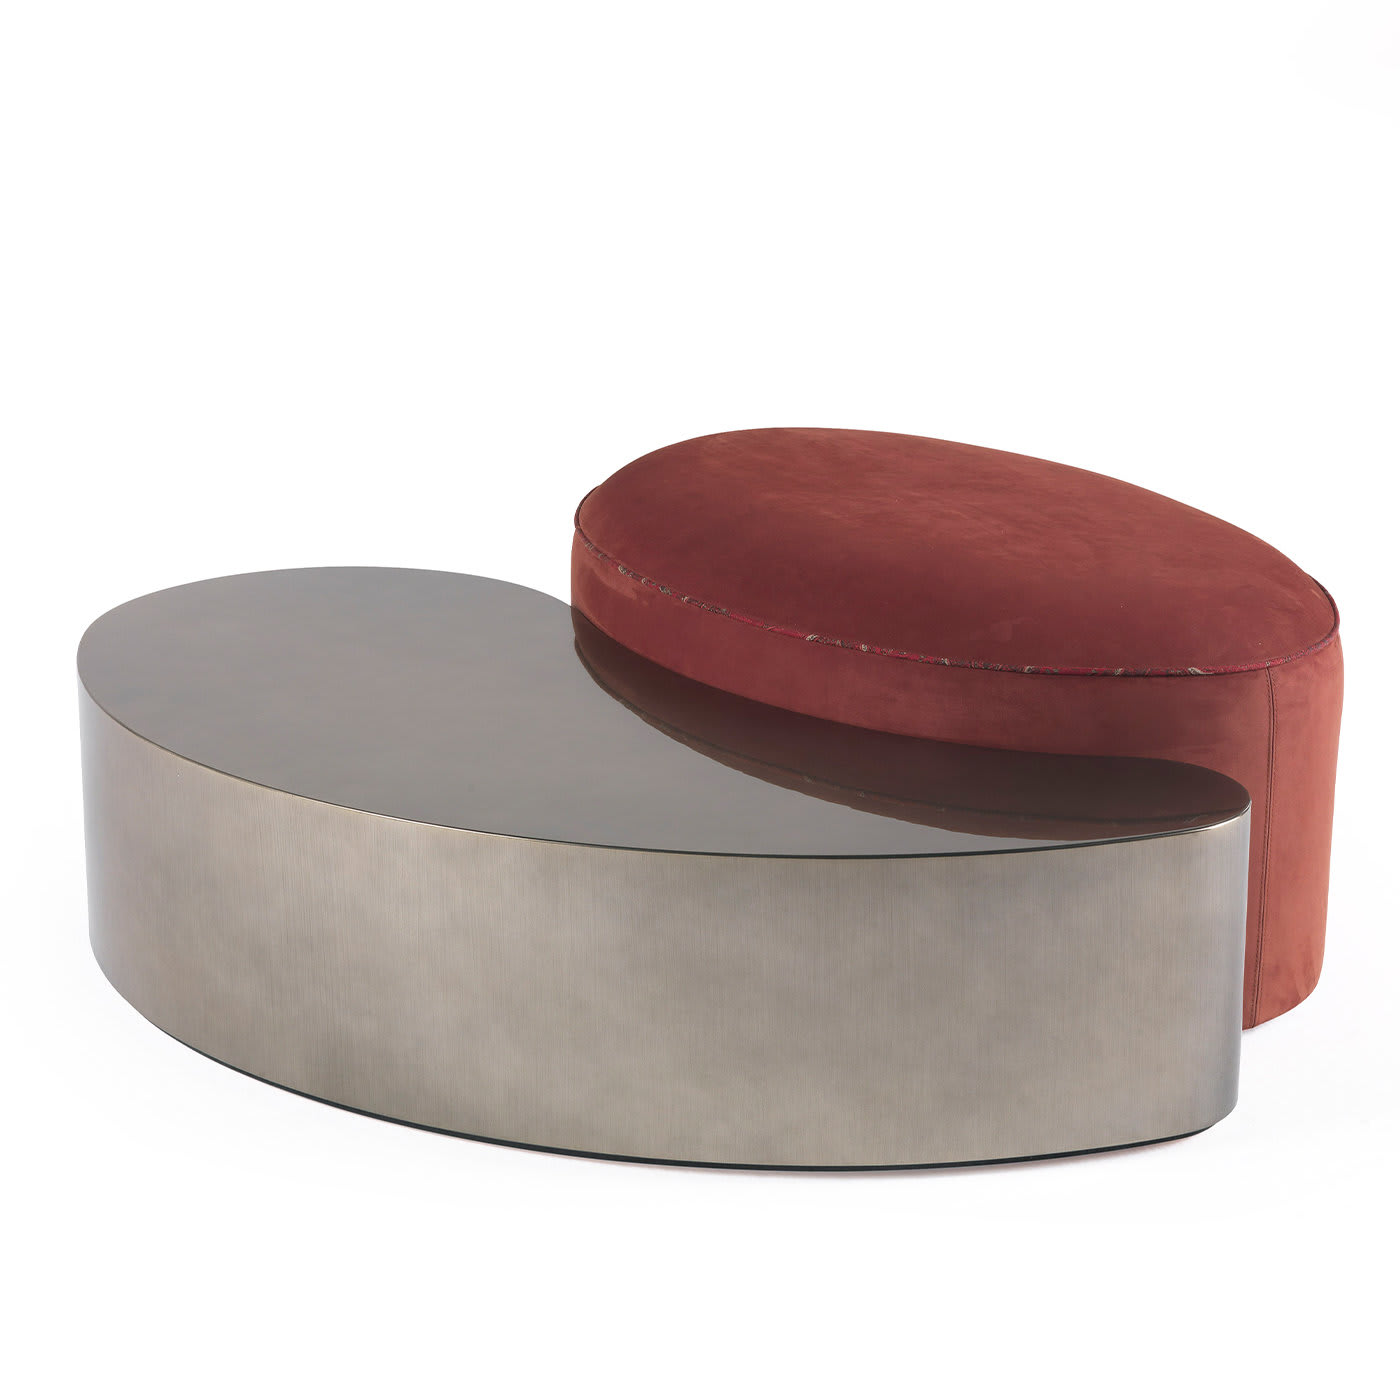 Goa Set of Pouf and Low Table #2 - ETRO Home Interiors